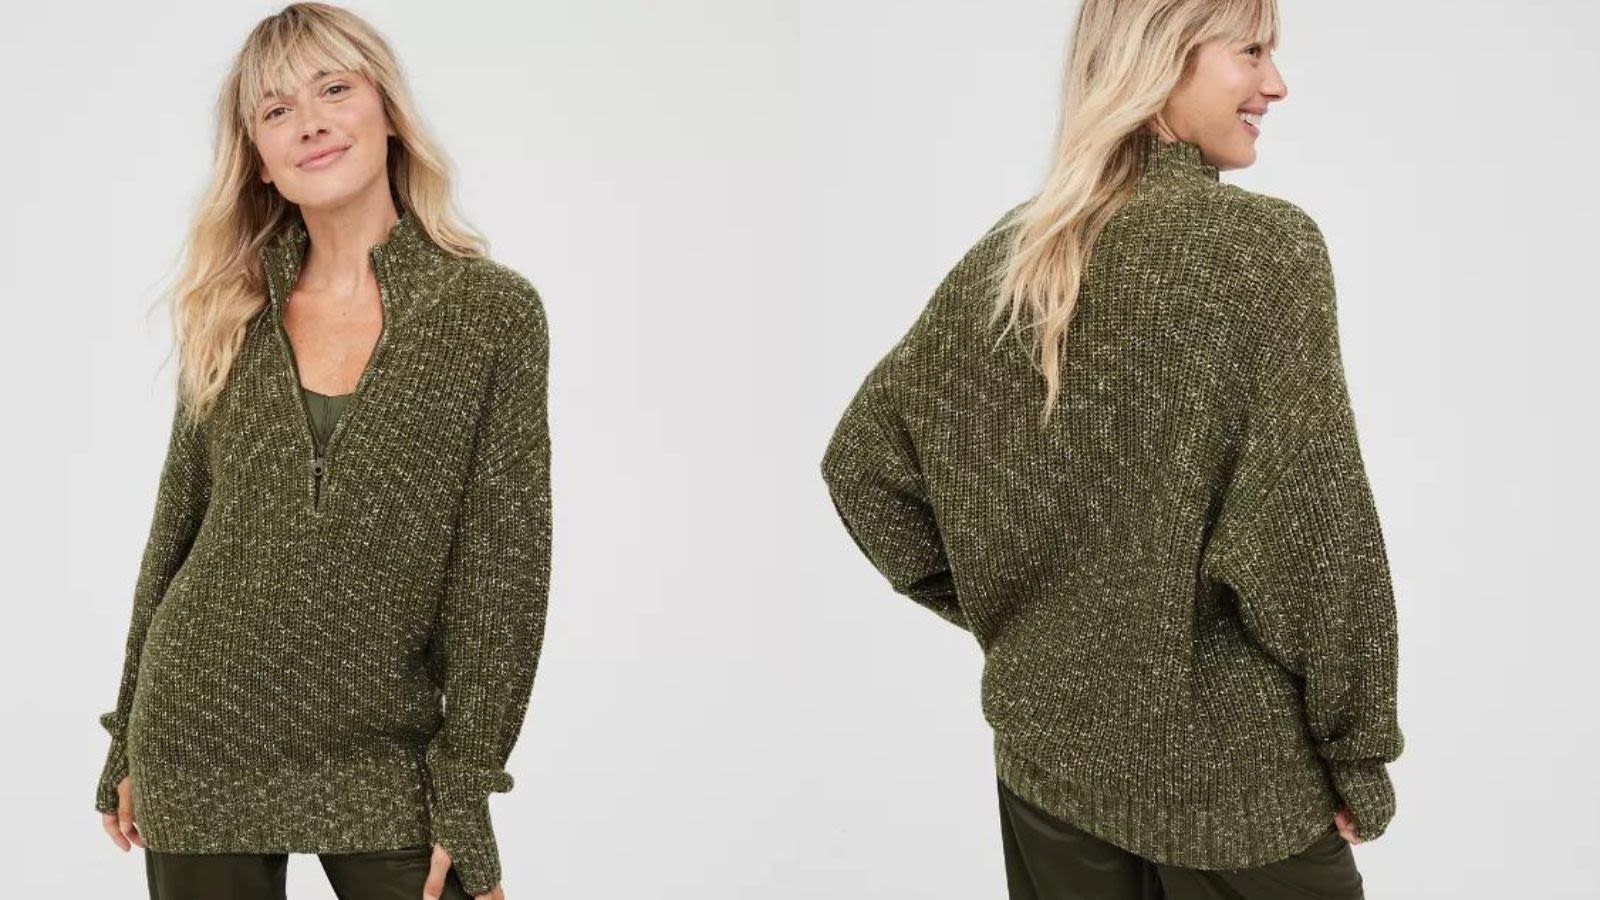 Aerie Sunday Soft Lace Up Sweatshirt in Sycamore Green - $39 (35